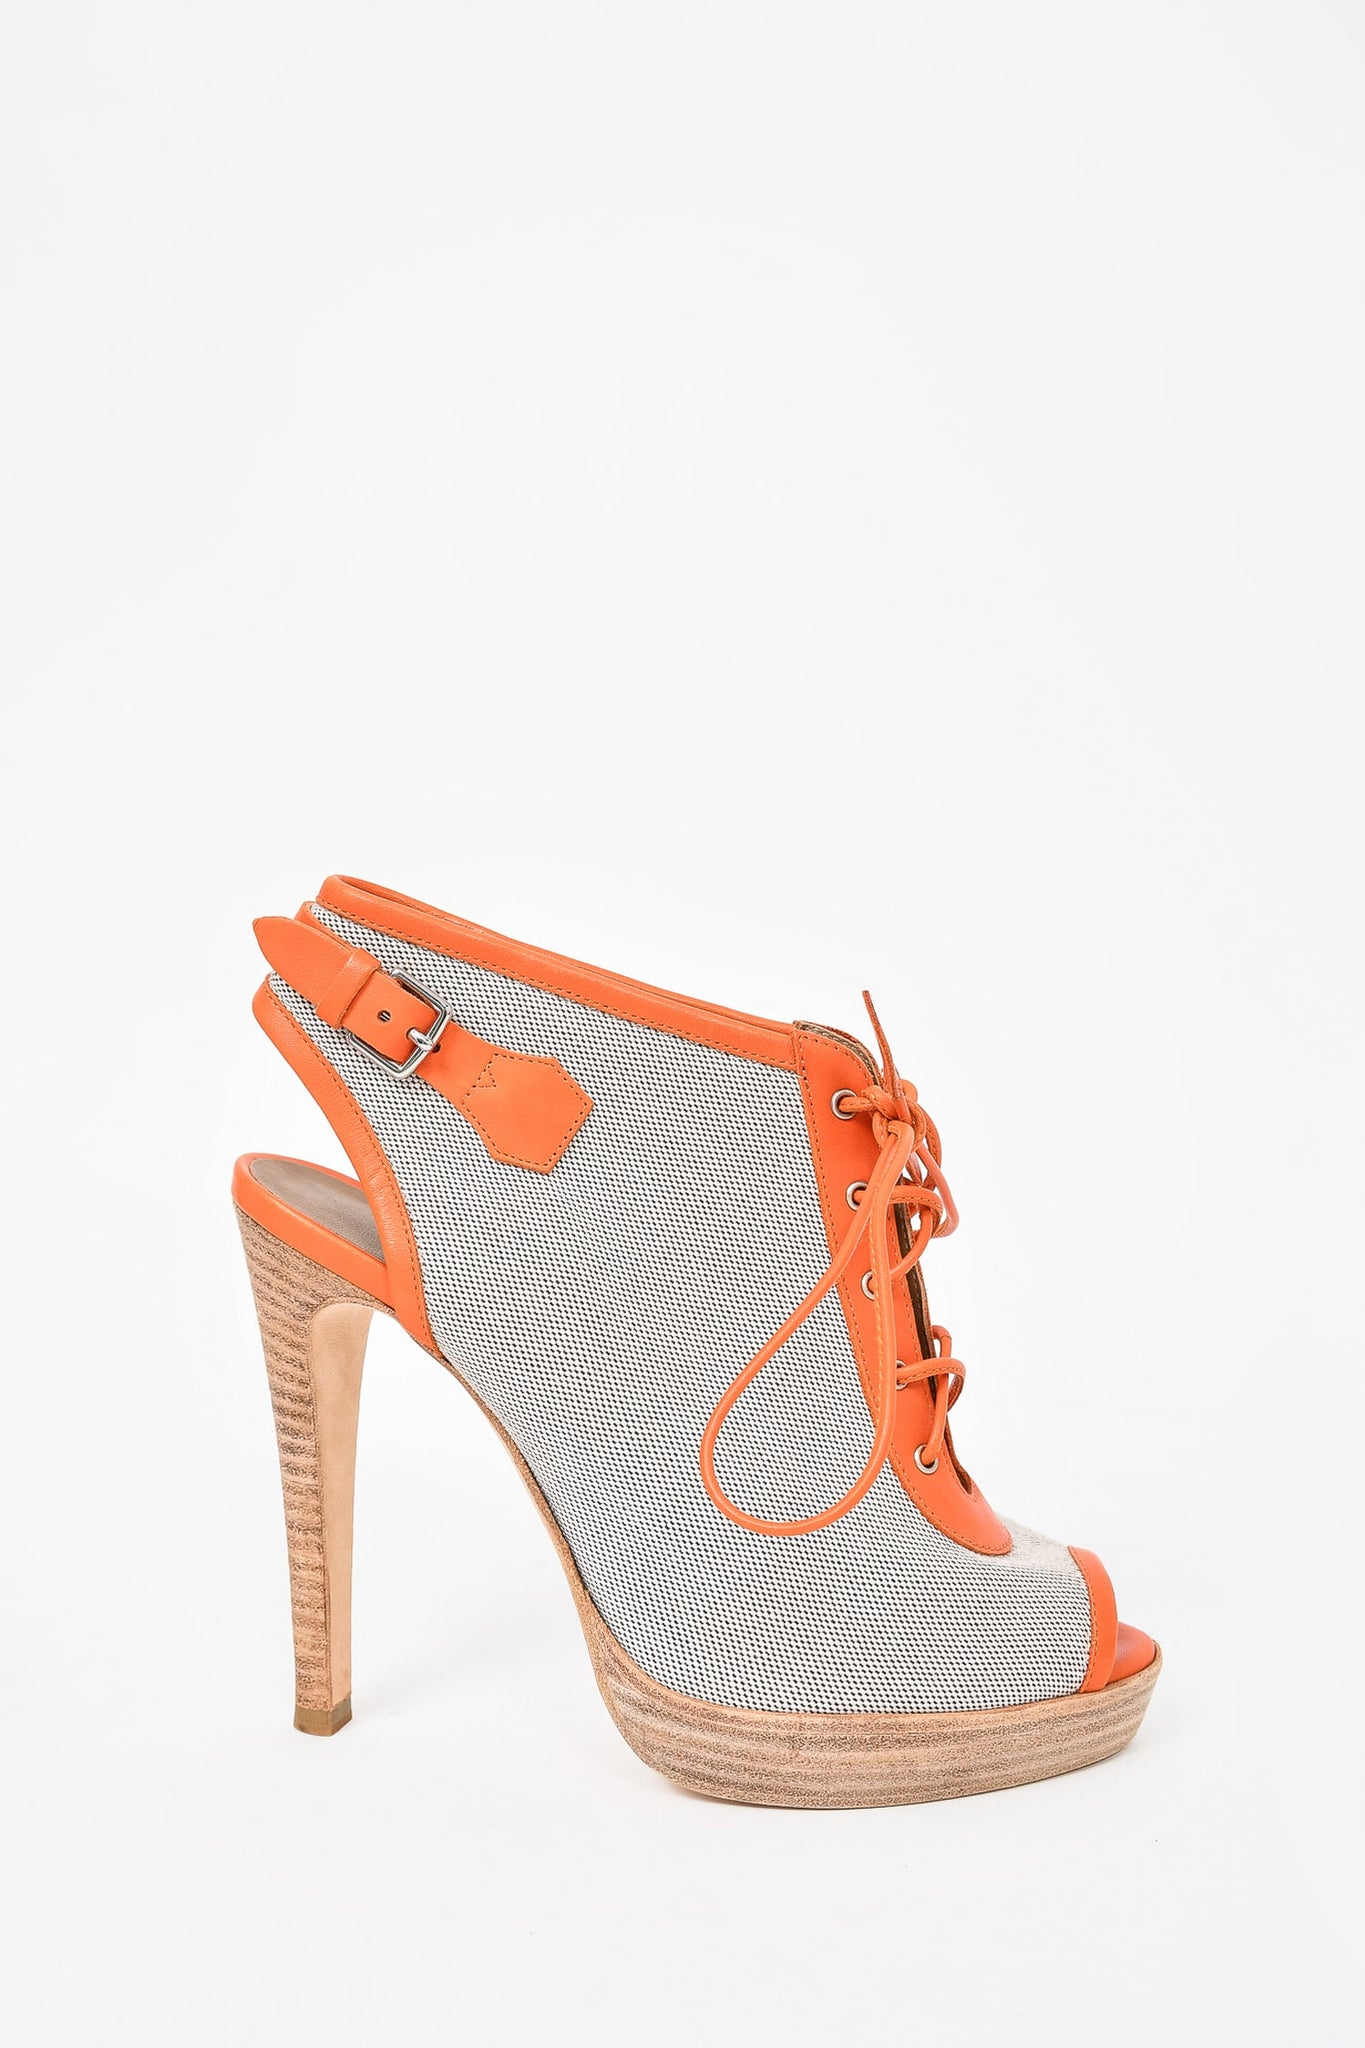 Sheer Mesh Lace Up Peep Toe Ankle Boots In ORANGE | ZAFUL 2024